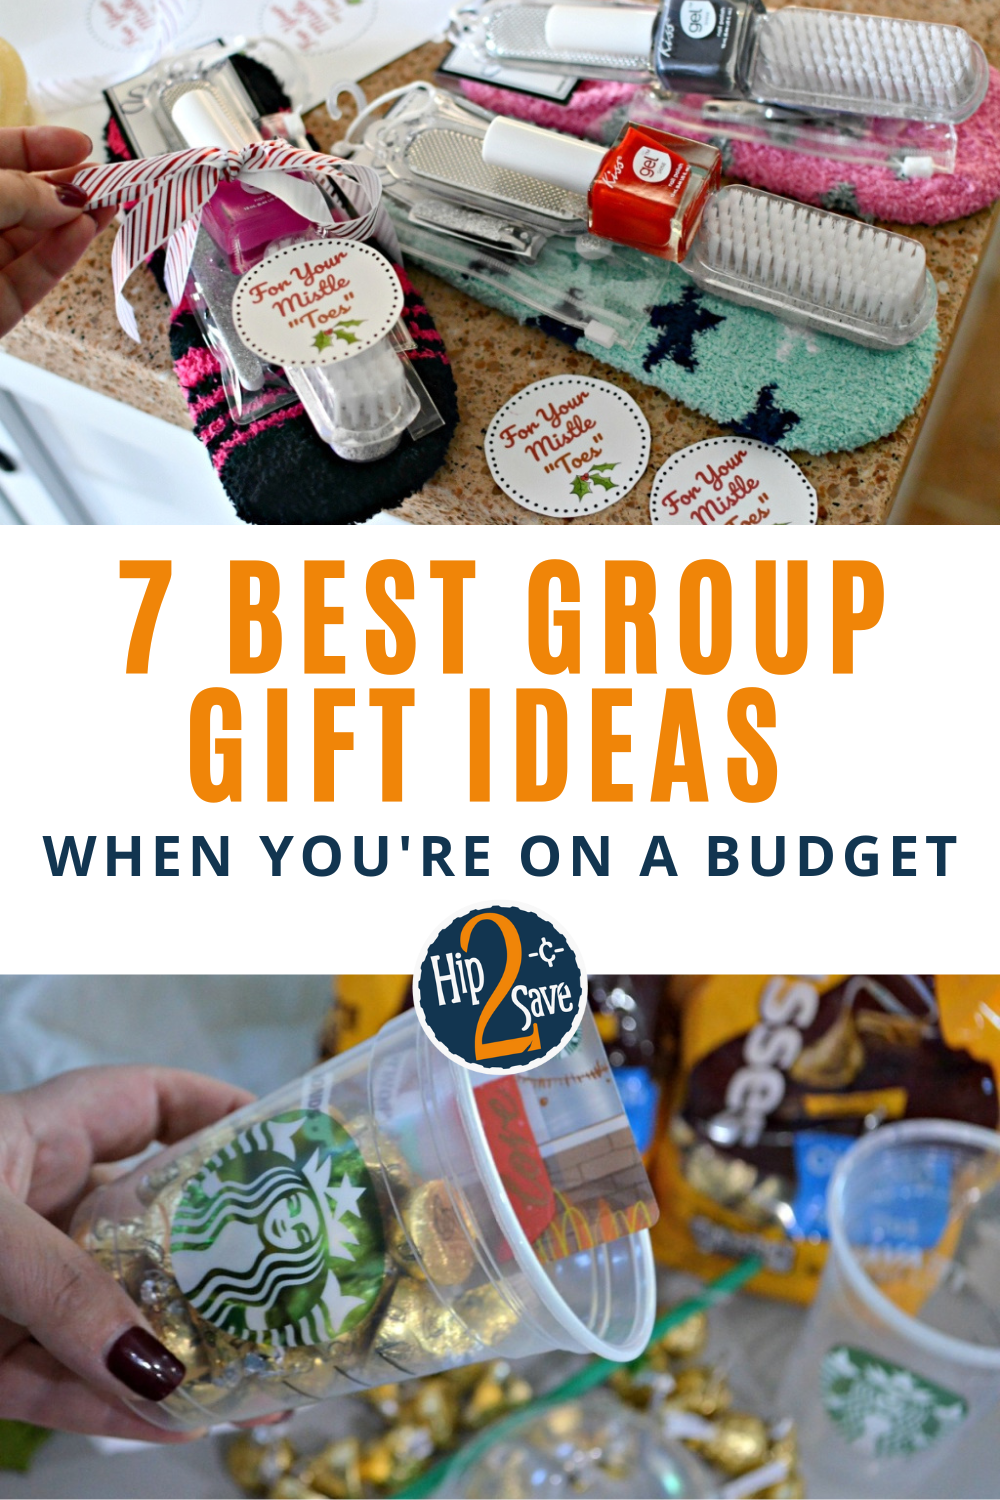 7 Best Group Gift Ideas When You're on a Budget | Hip2Save